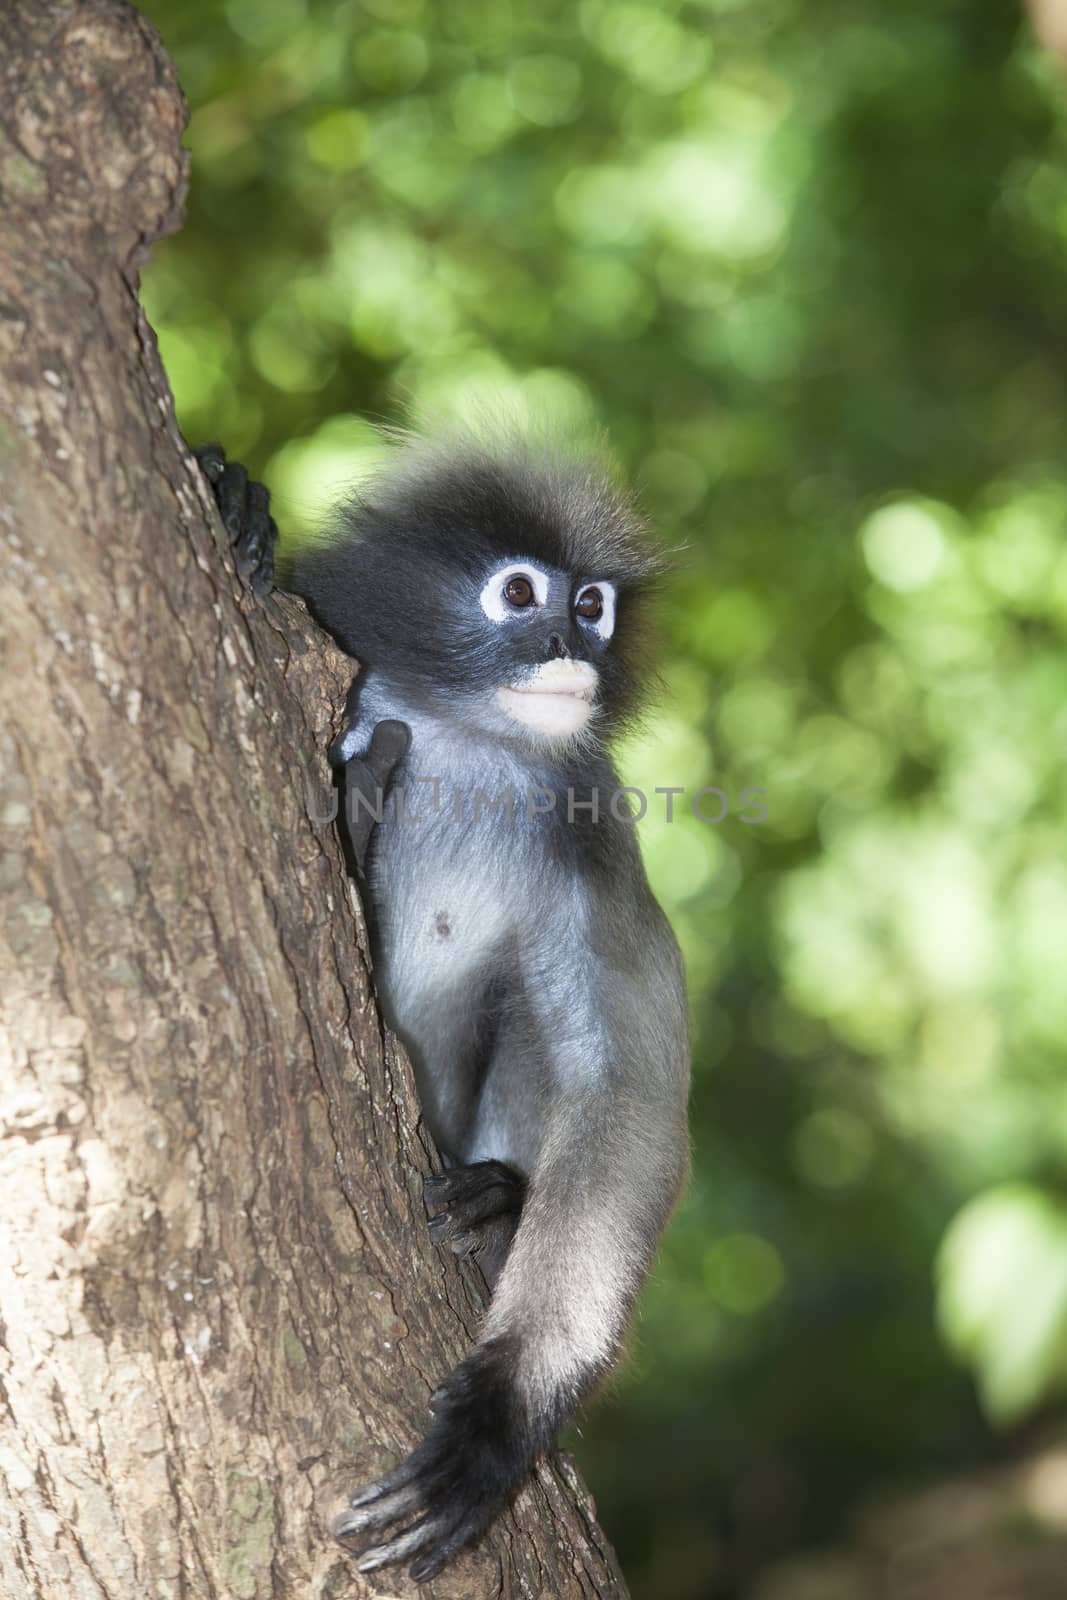 The dusky leaf monkey, spectacled langur, or spectacled leaf mon by jee1999